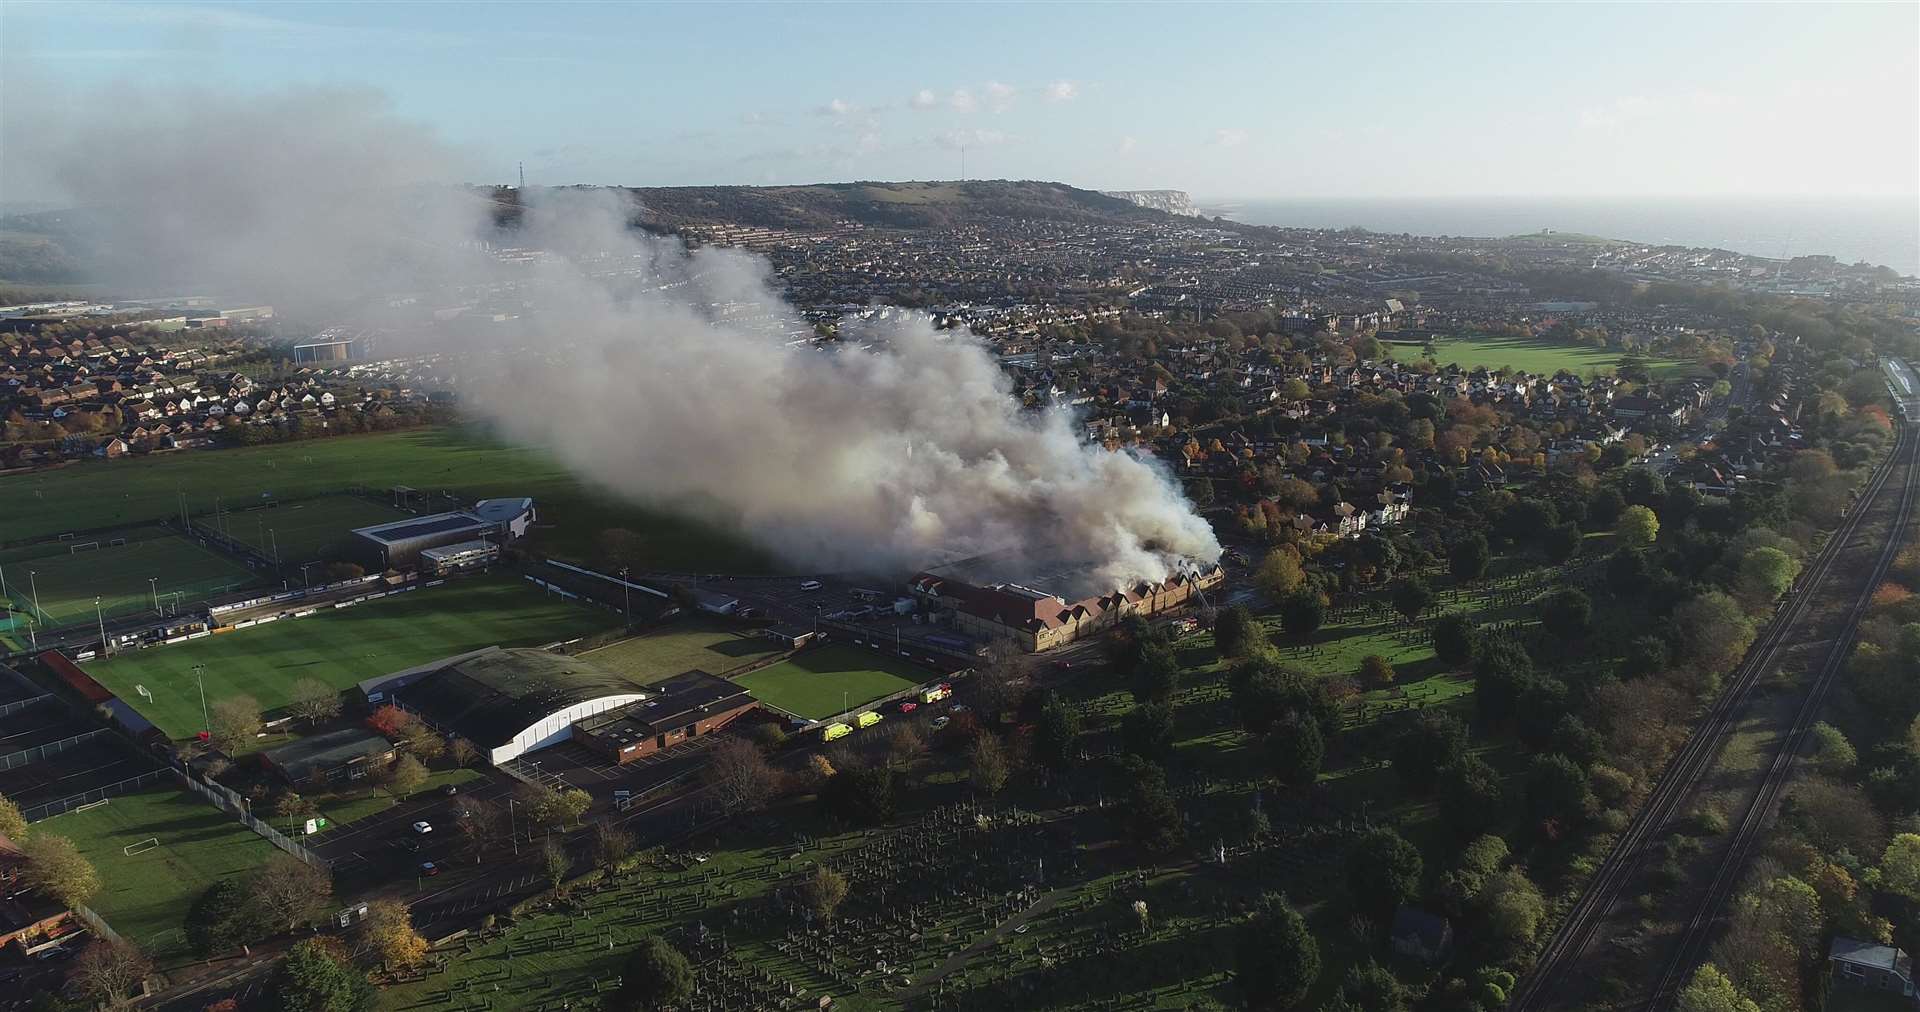 Drone images show the extent of the fire. Picture: Ollie King